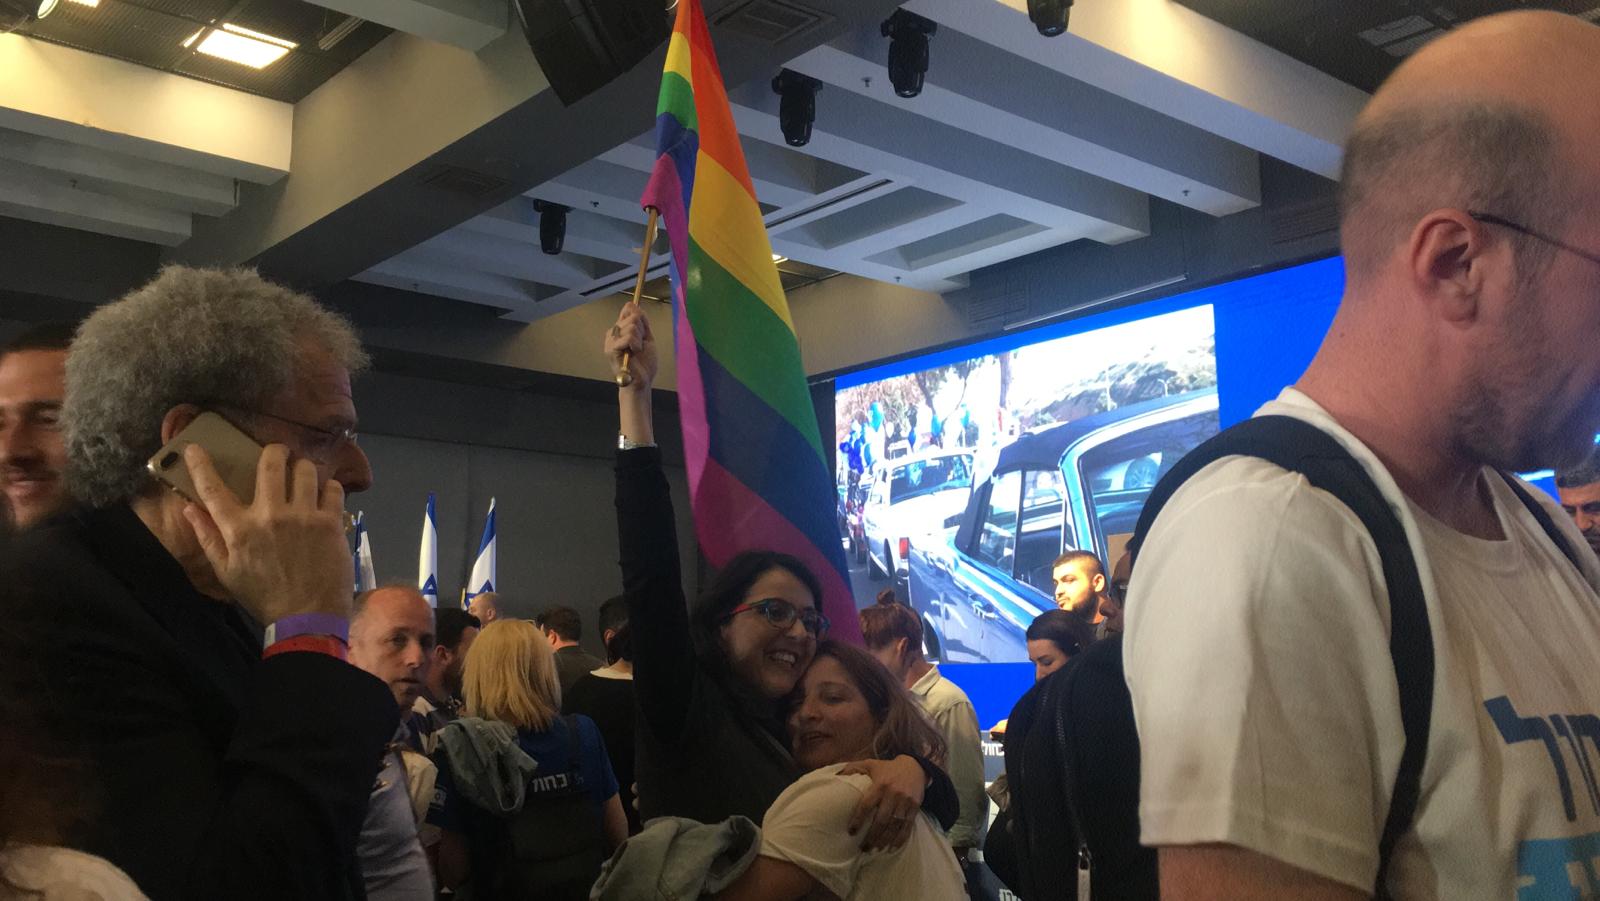 Zehorit, 43 (holding the rainbow flag): “We won, this means finally equality for LGBT in Israel! I feel that I am an equal citizen in Israel now.”